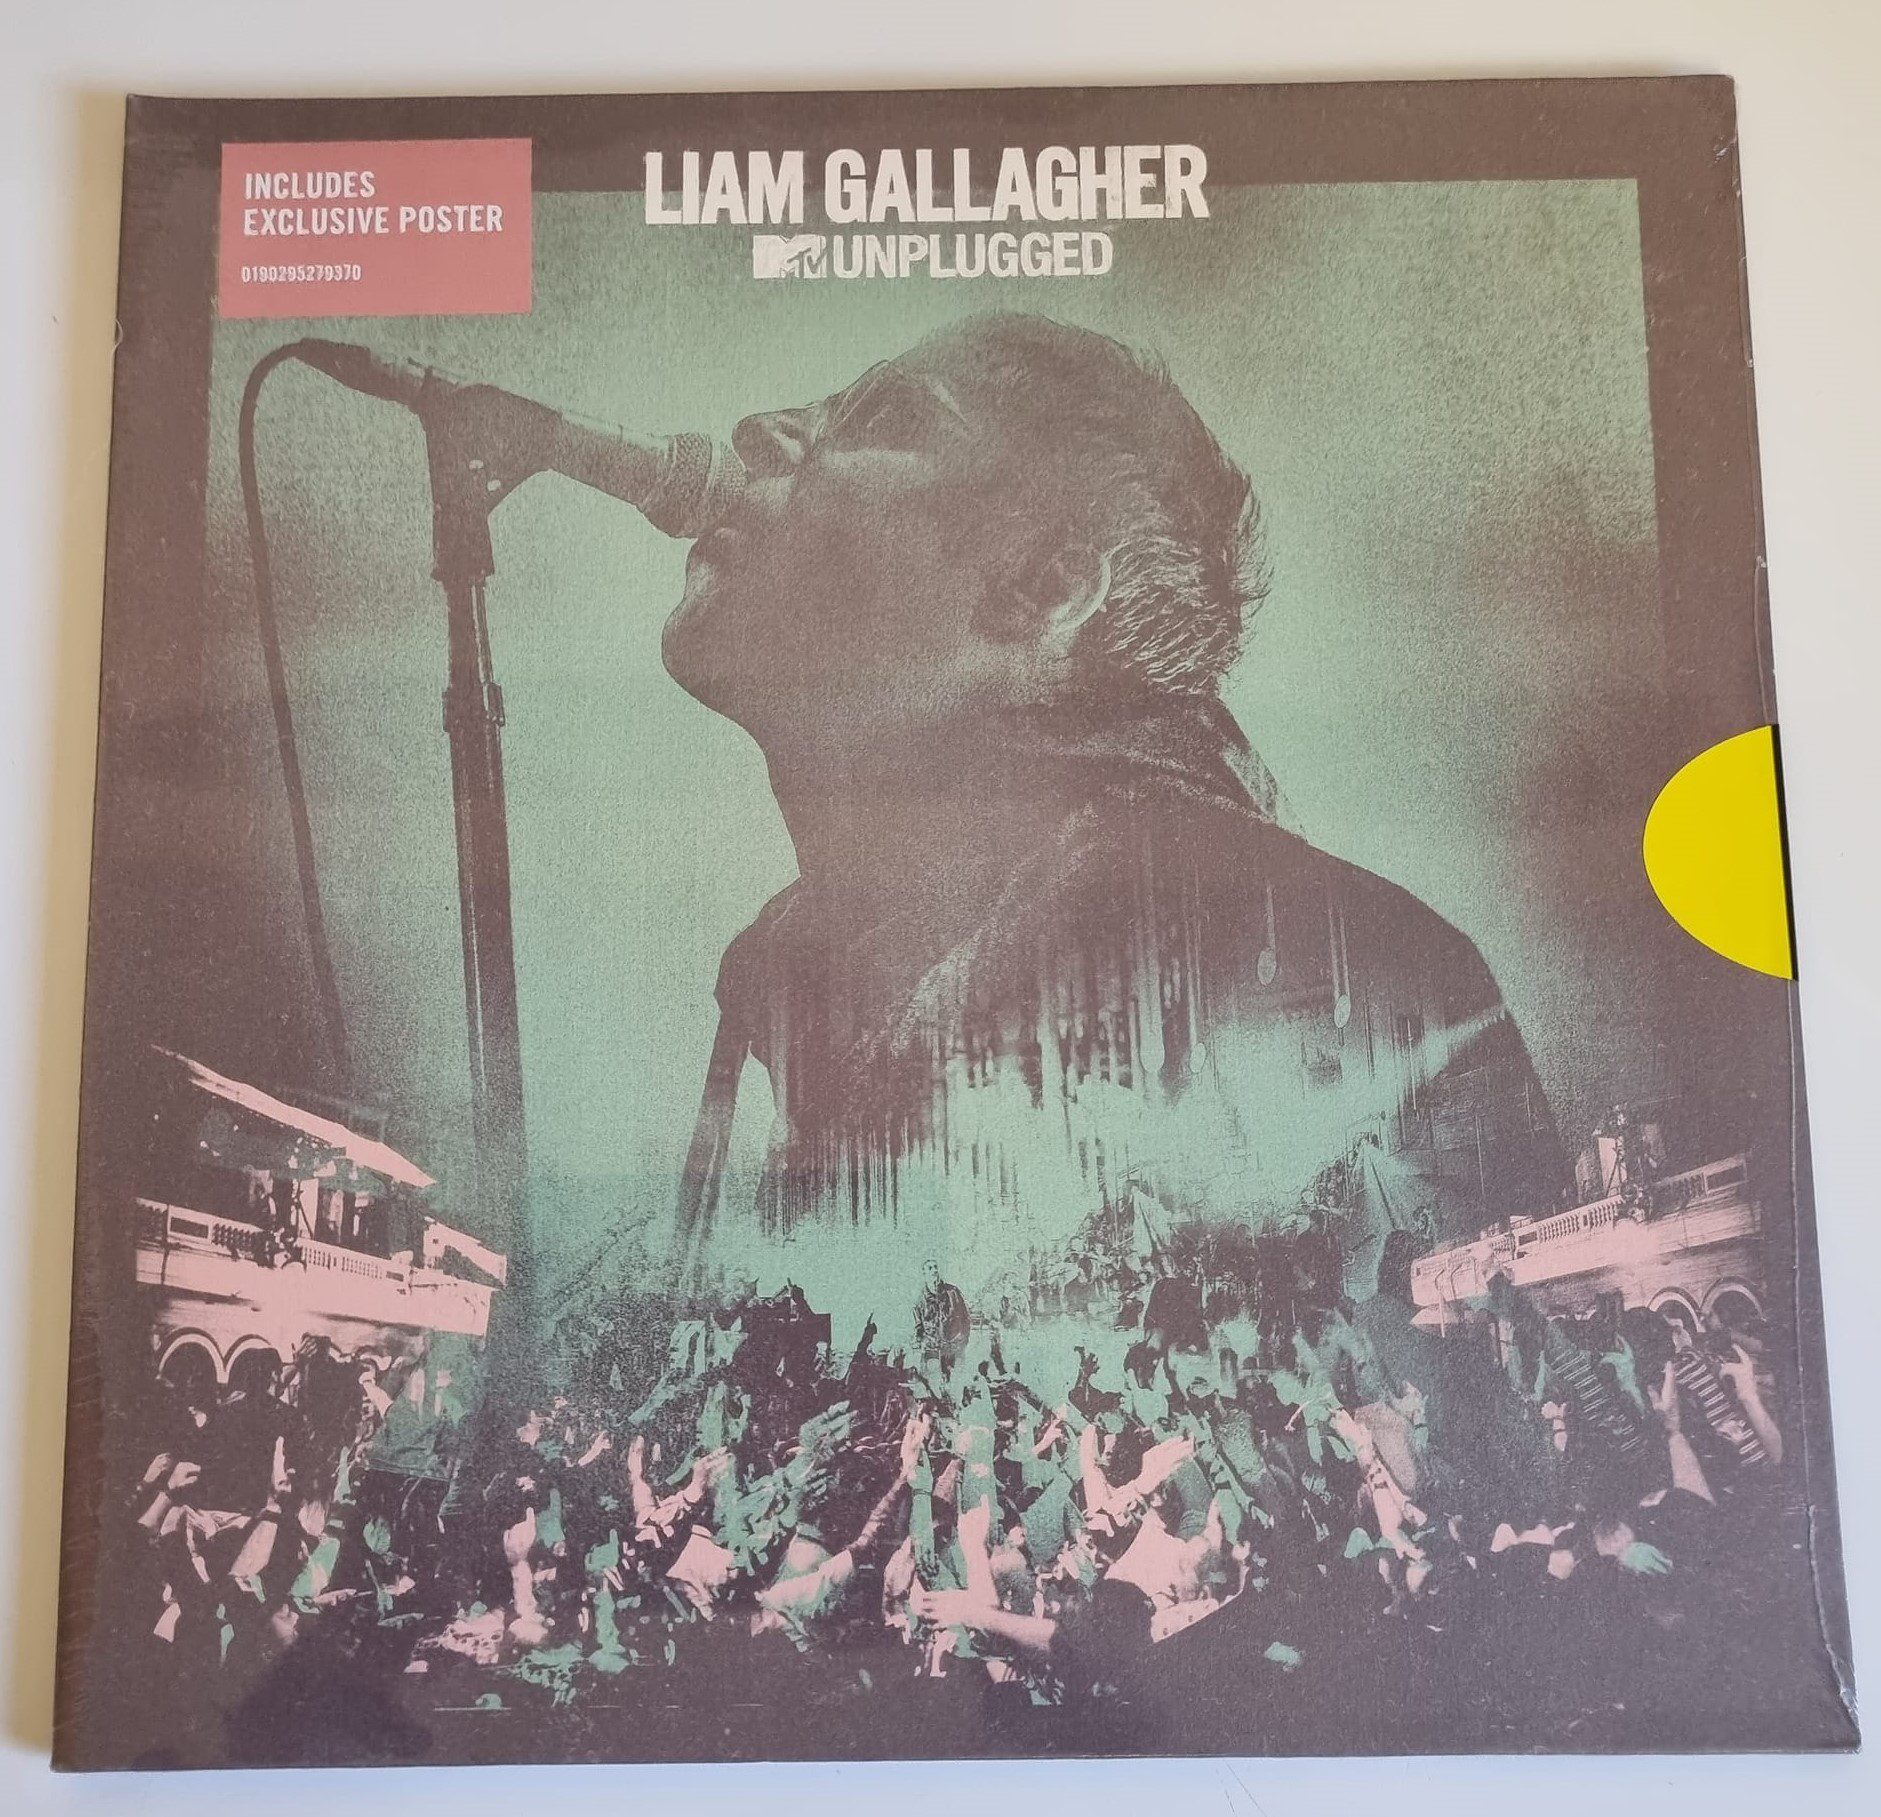 Buy this rare Liam Gallagher record by clicking here